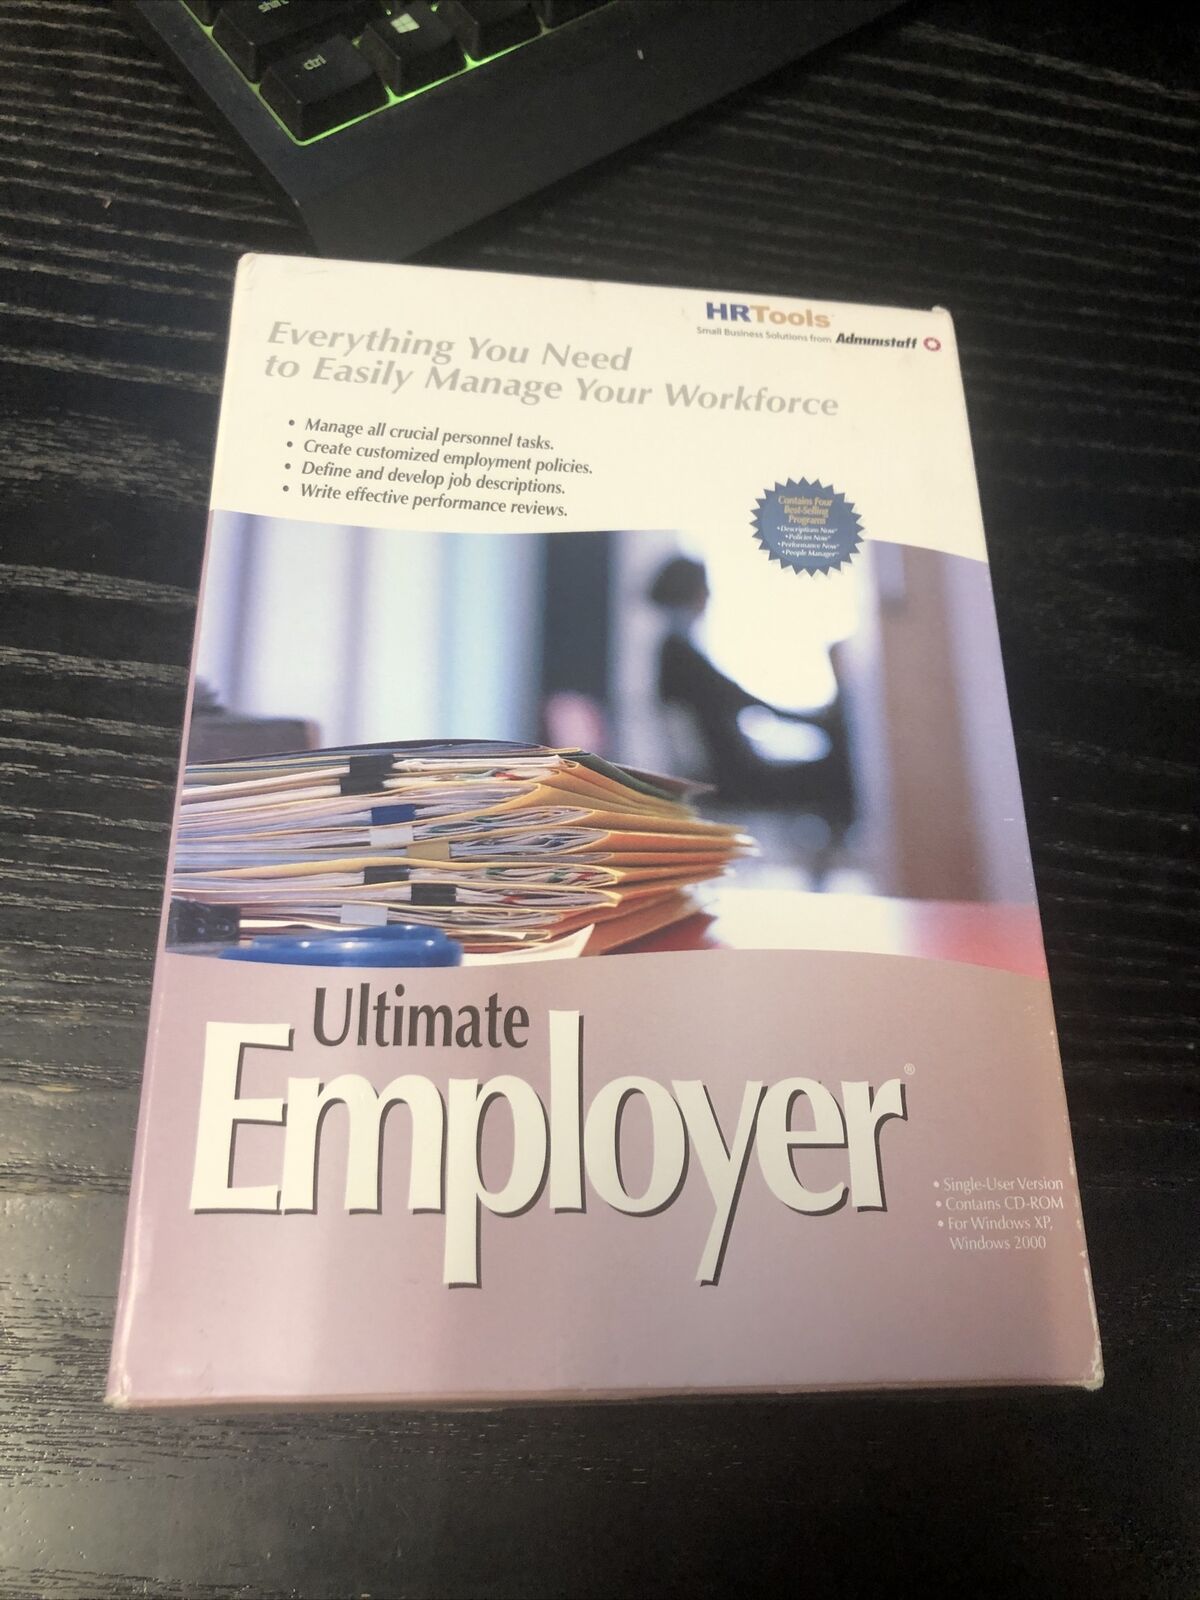 Ultimate Employer Workforce Management Software CD-ROM HR Tools By Administaff